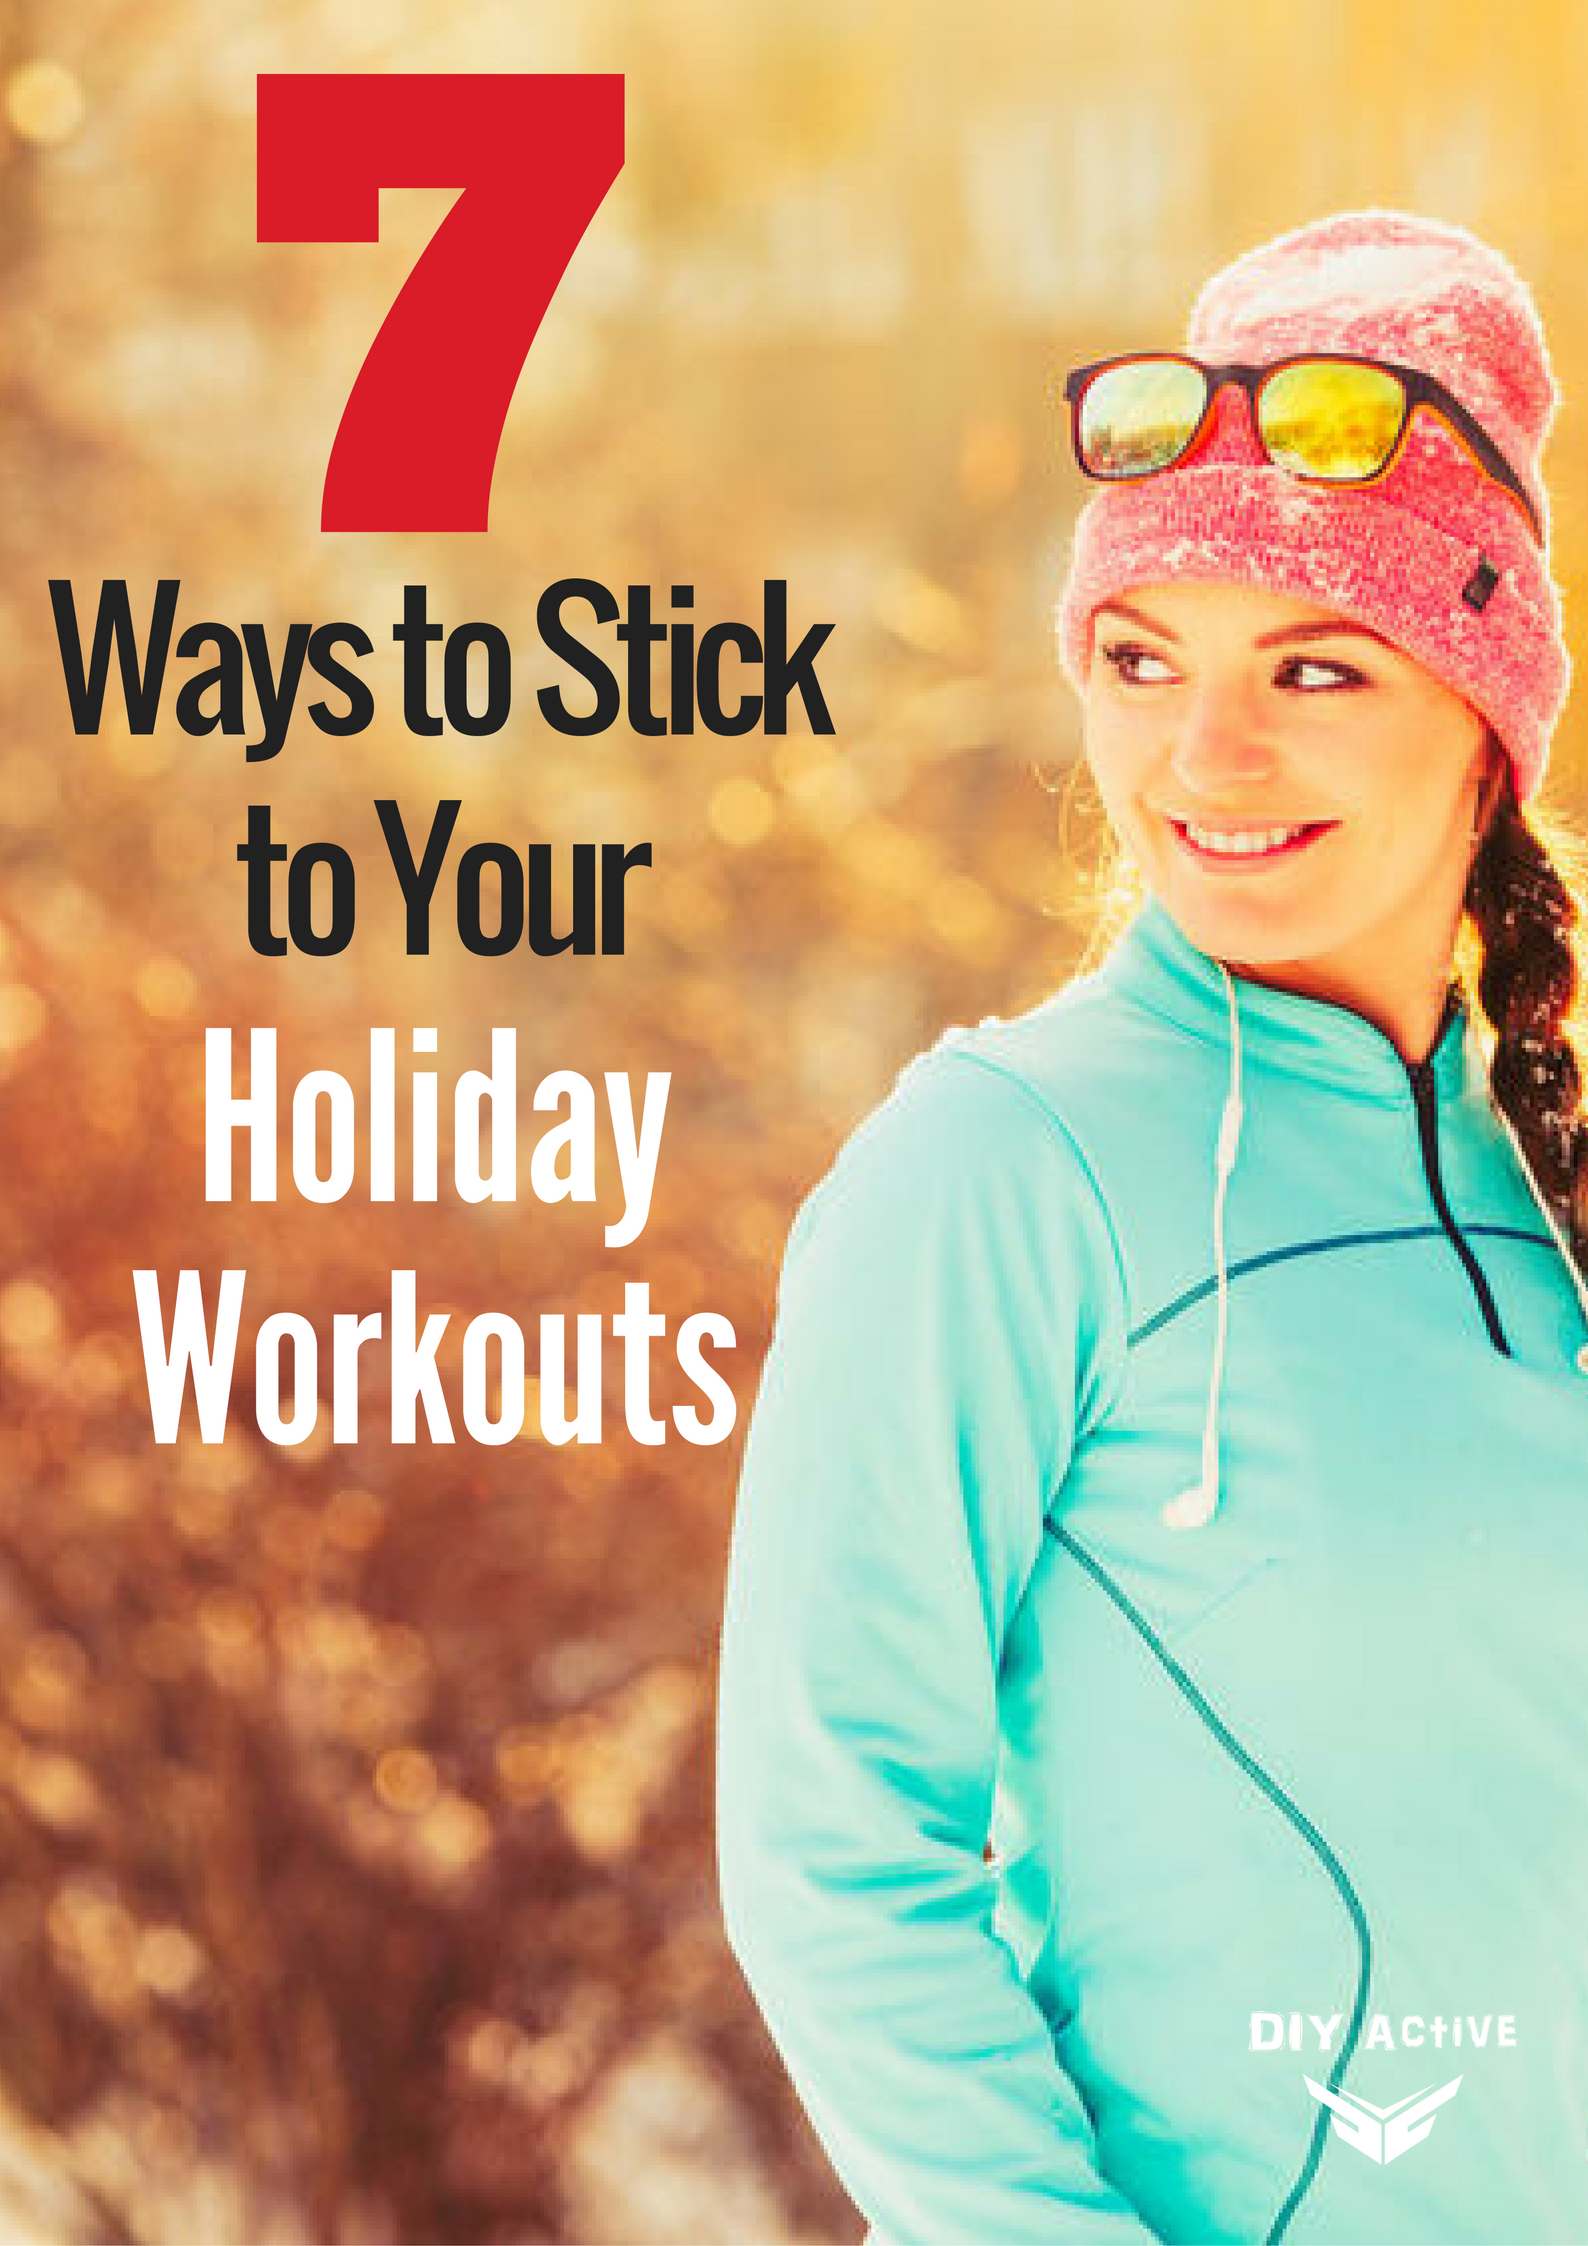 7 Ways to Stick to Your Holiday Workouts